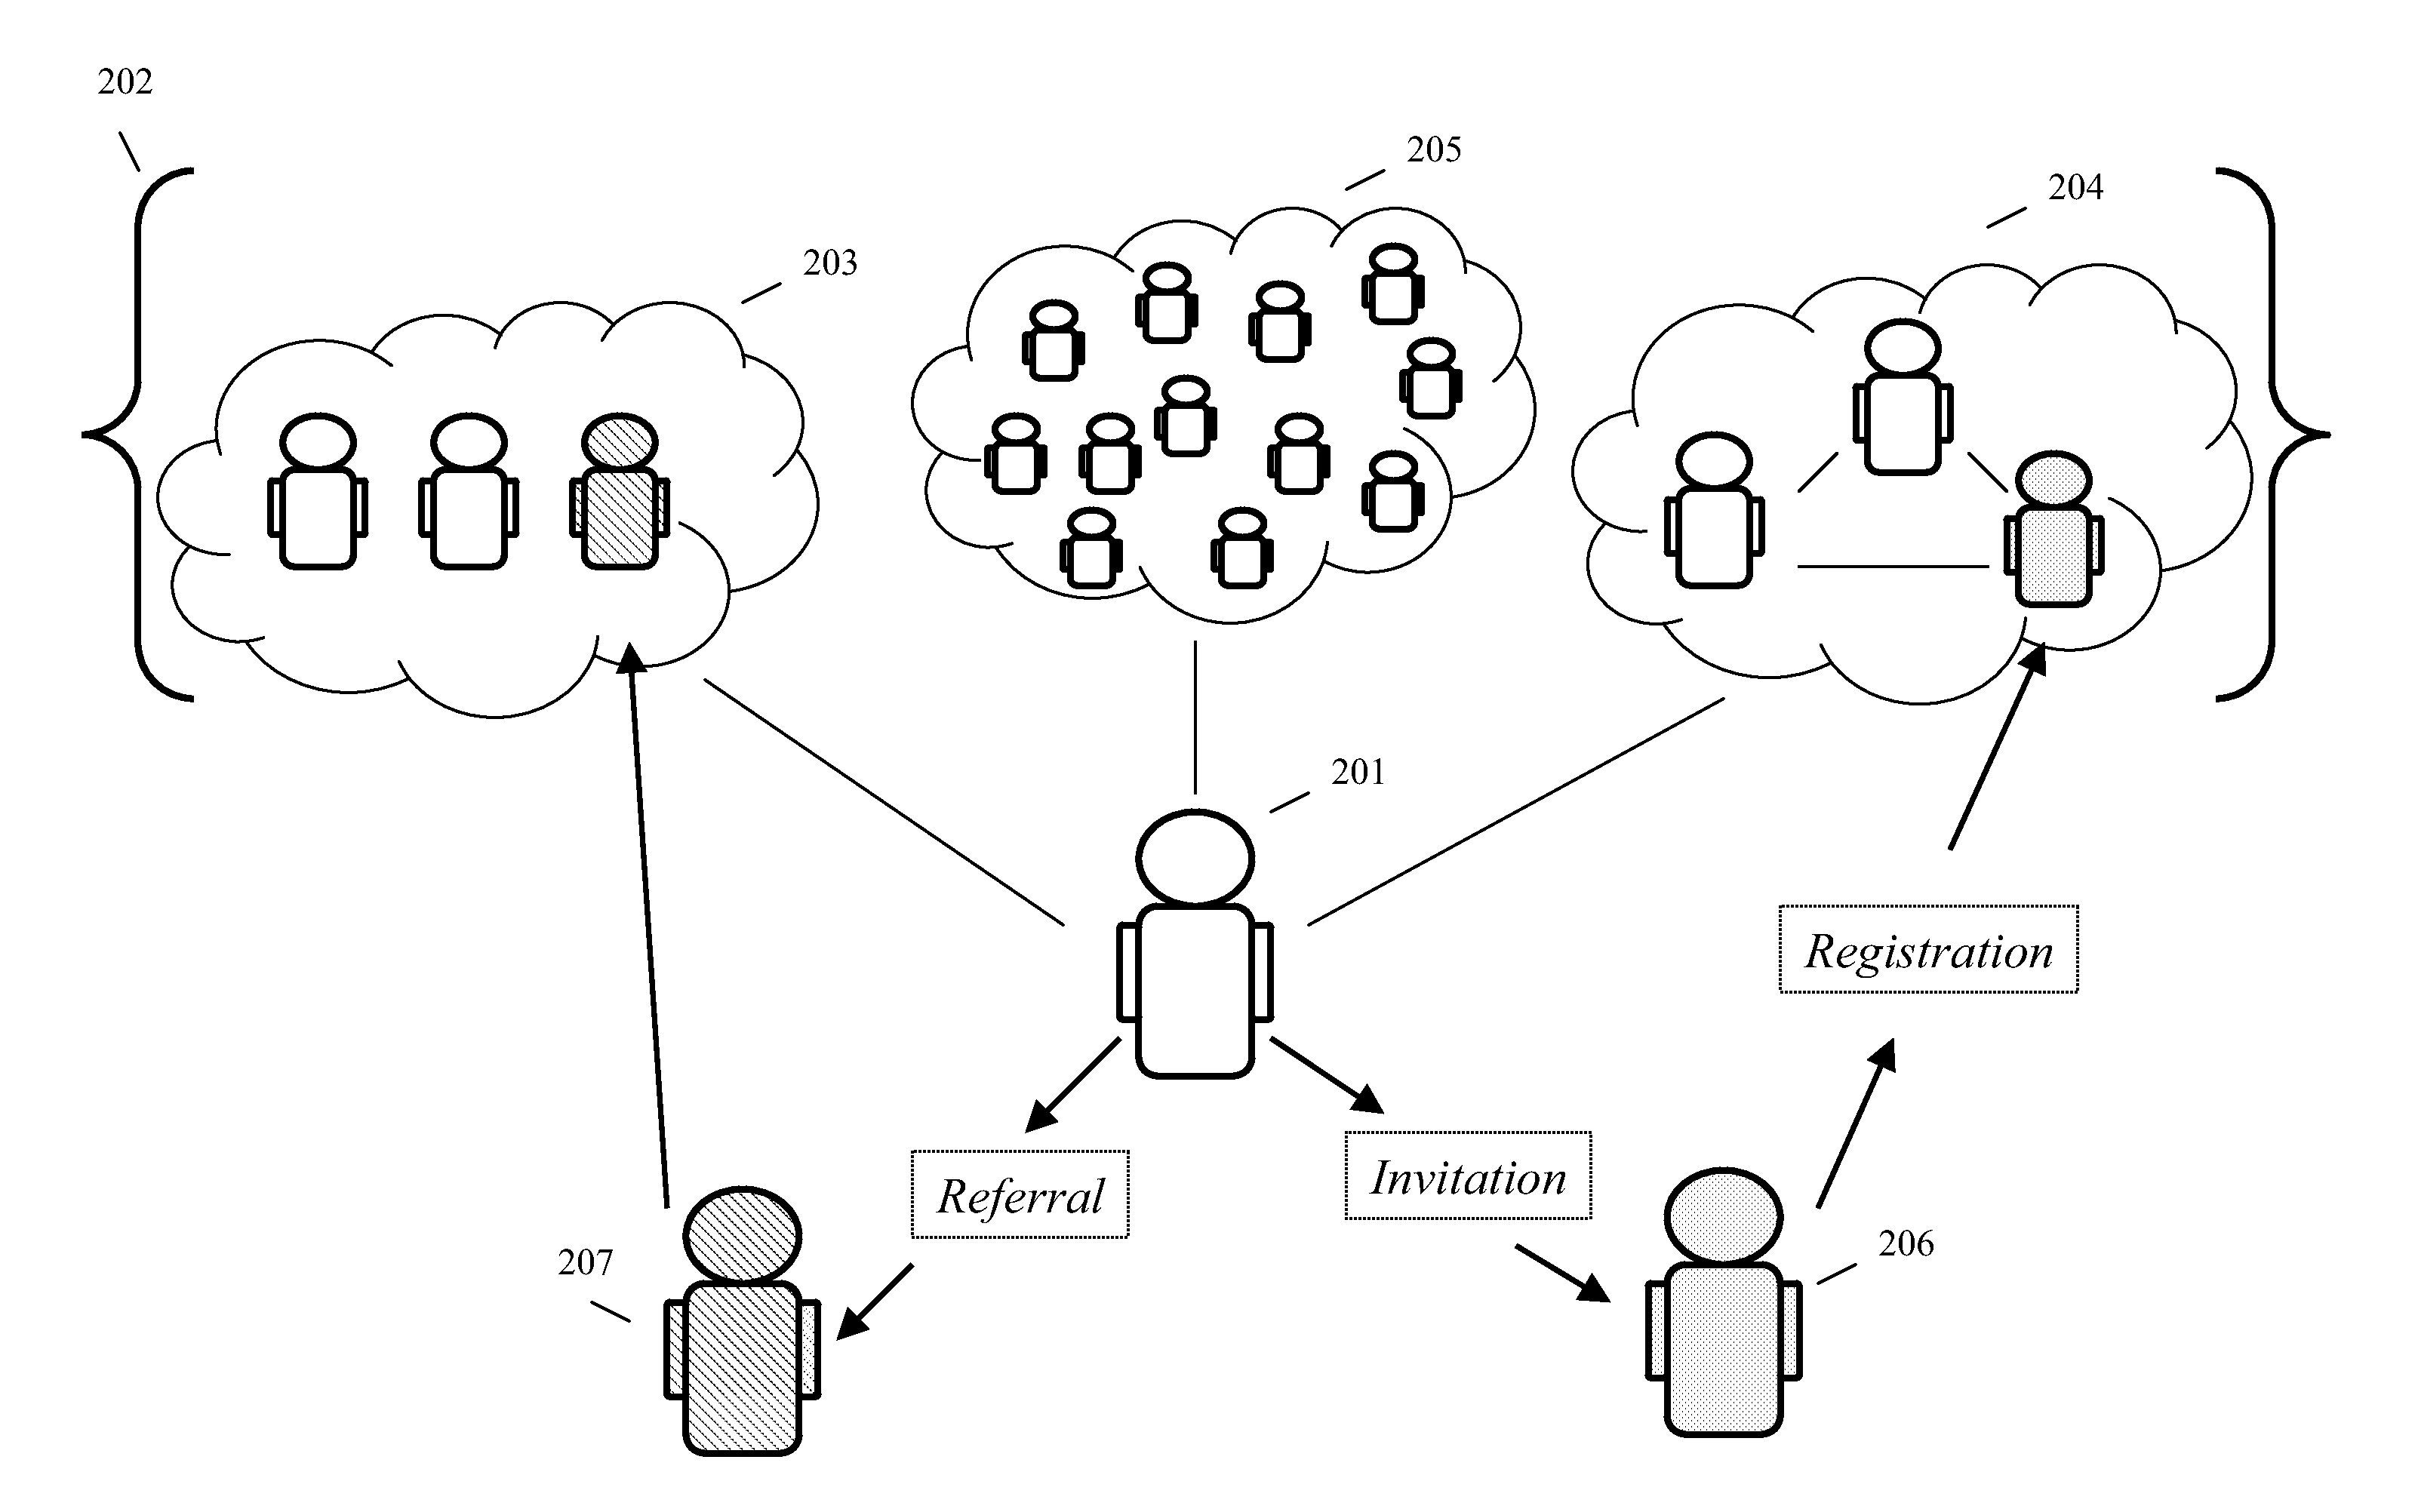 Systems and methods for providing multiple incentives for job referrals